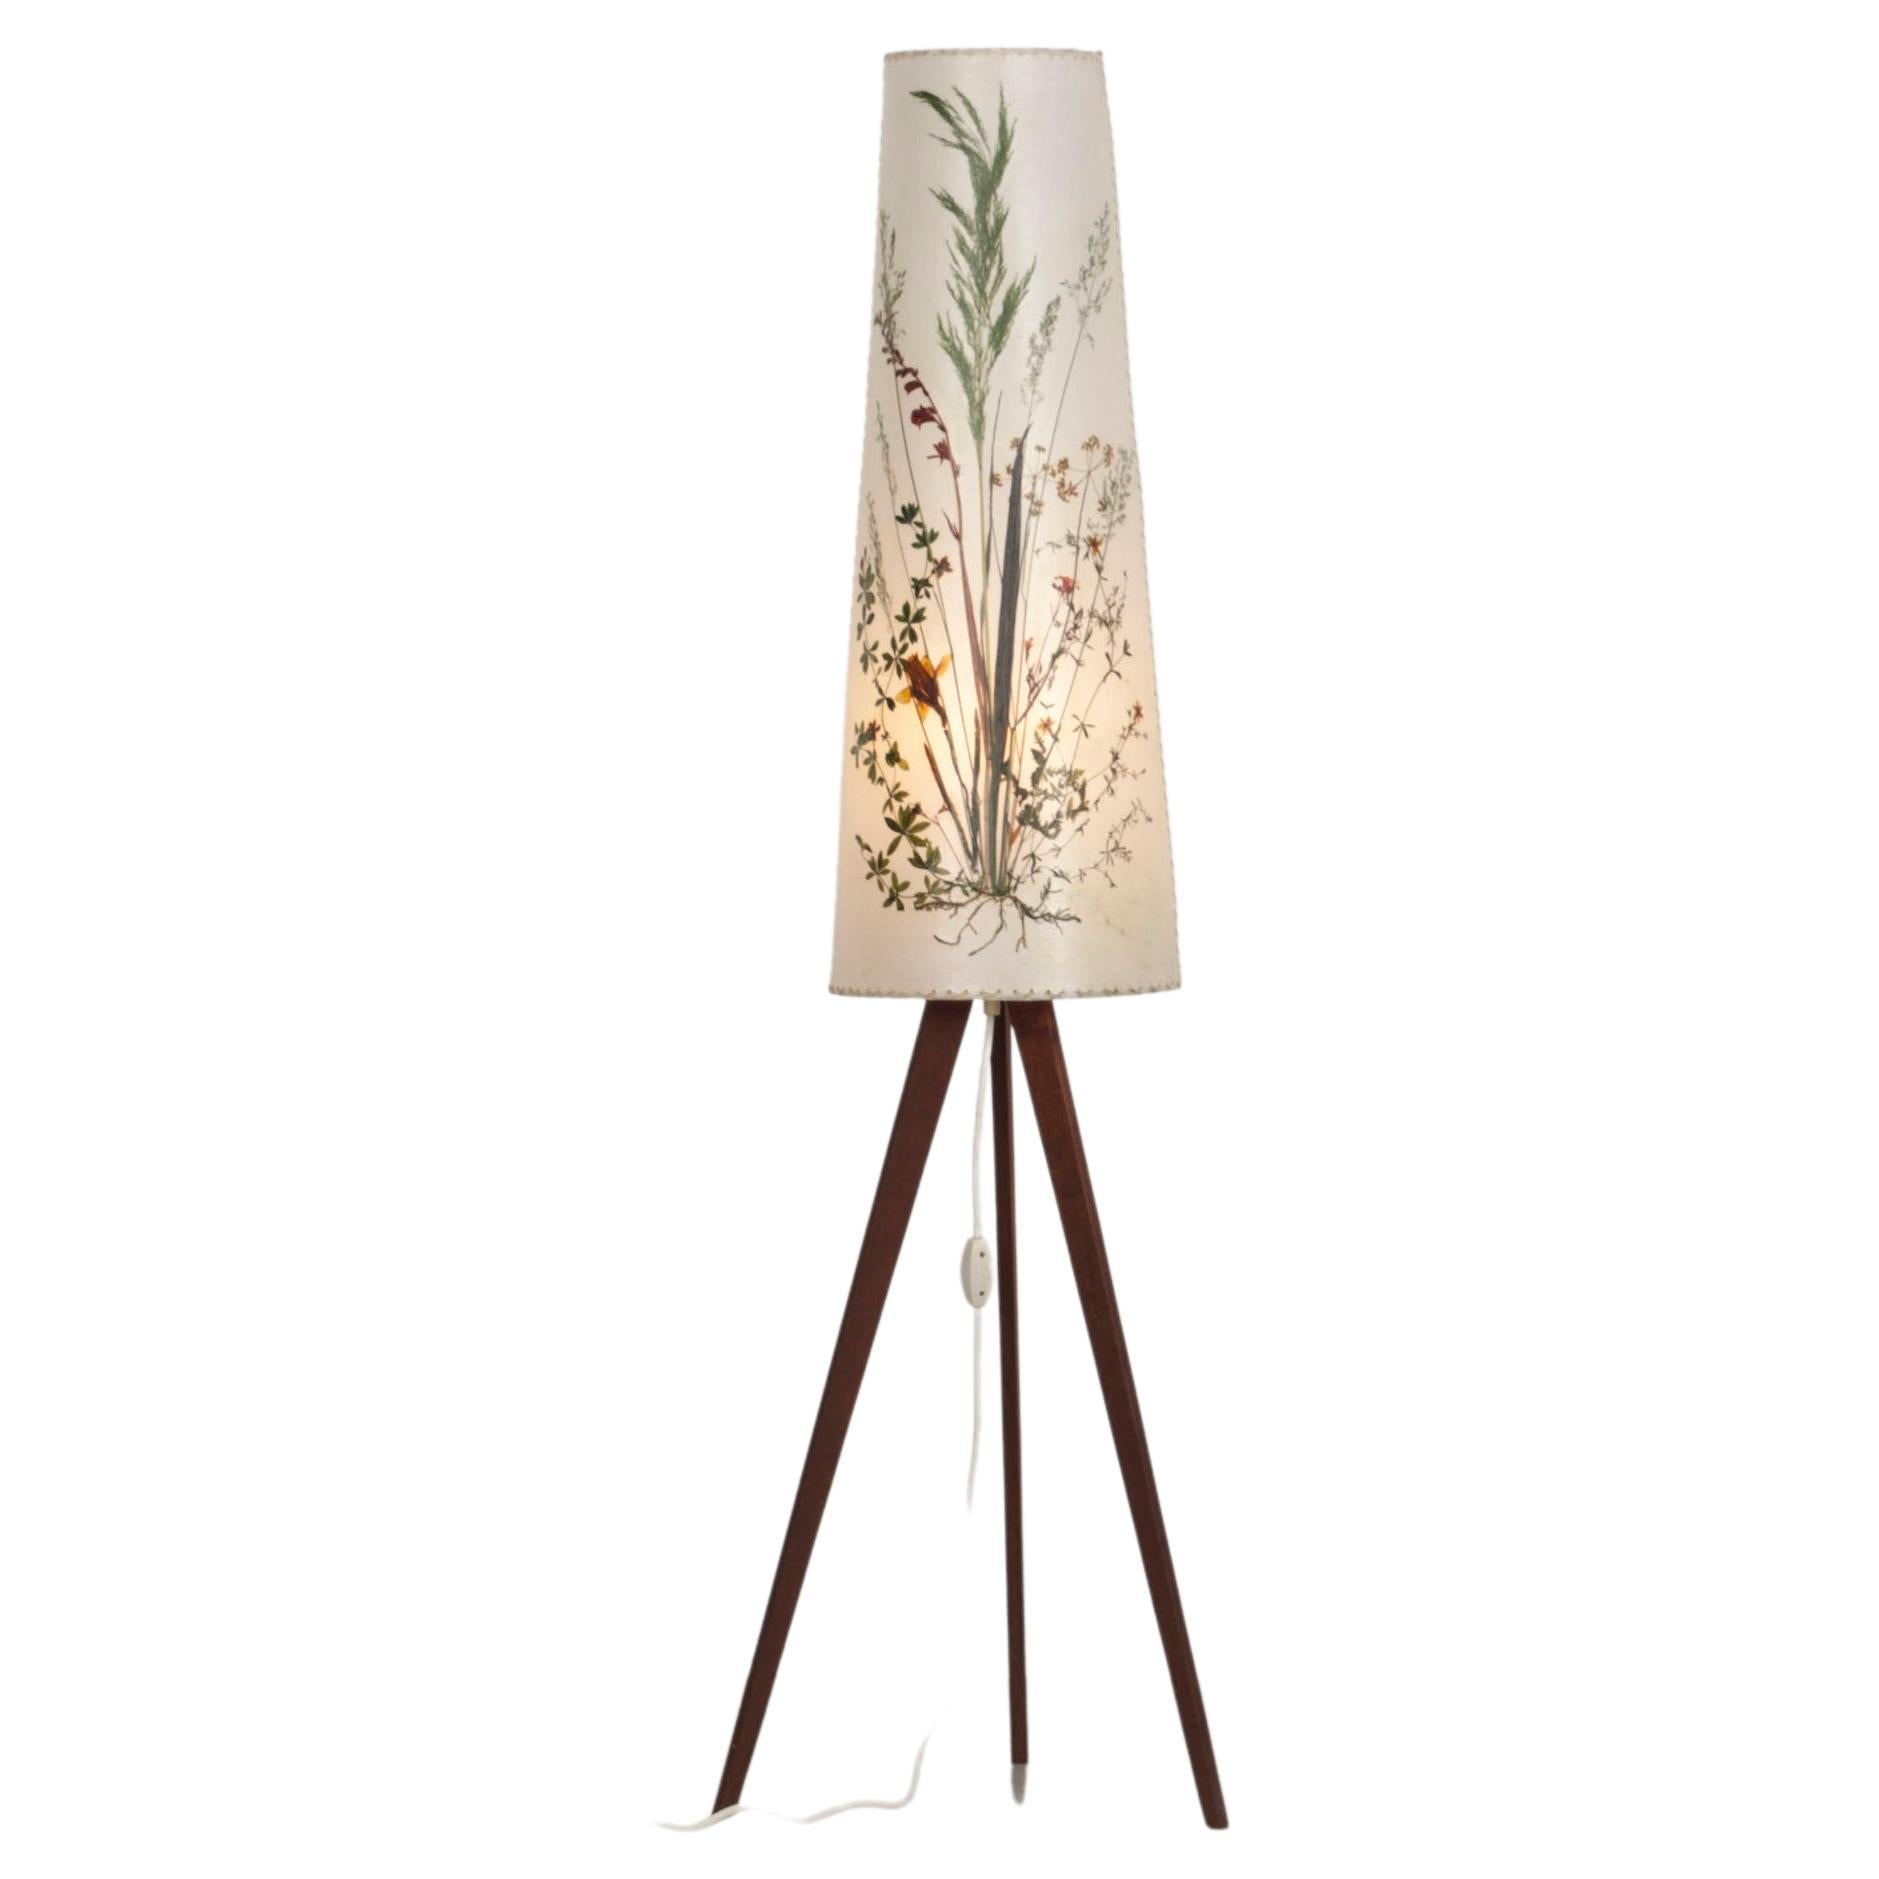 Three-Legged Floor Lamp with Real Dried Flowers from the 50s